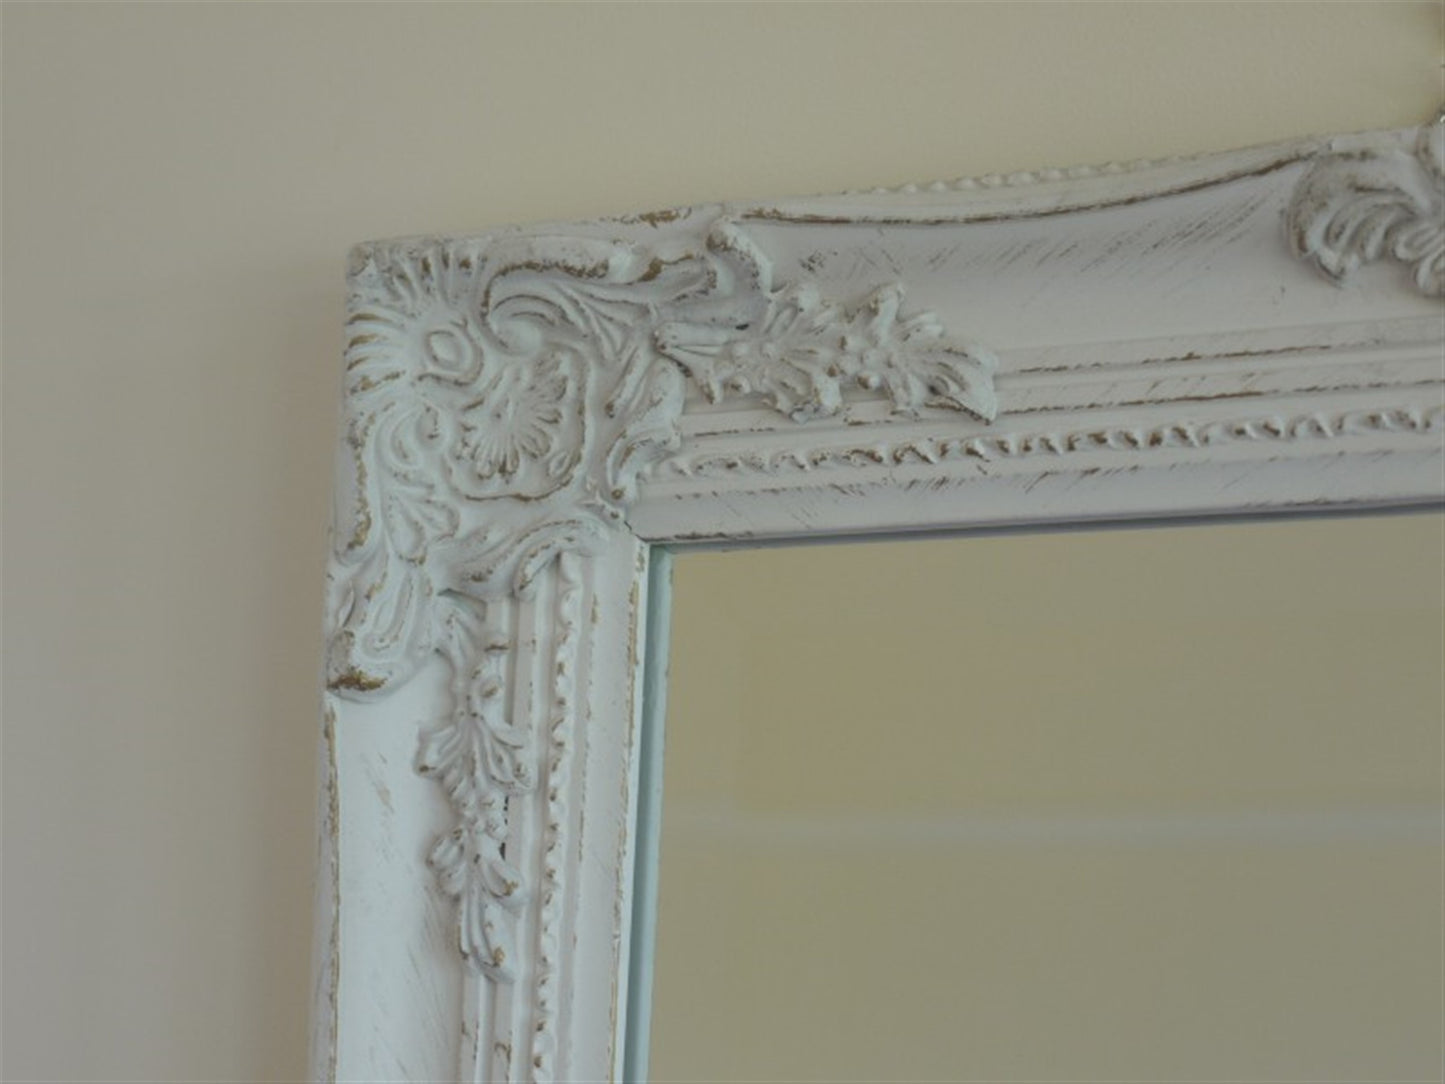 16"x51" White With Gold Long Mirror